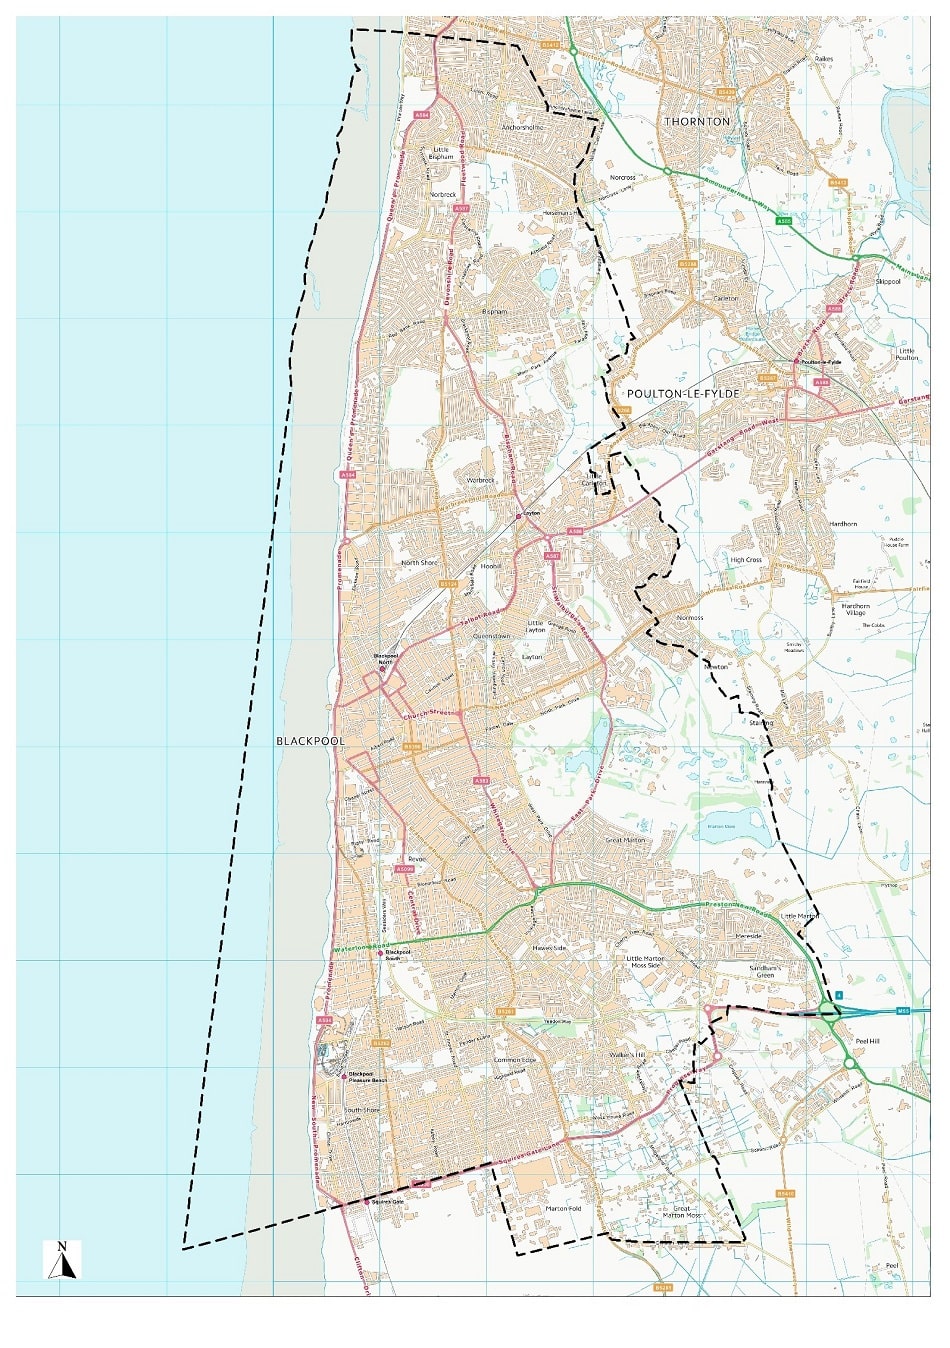 Map showing the boundaries of the Blackpool Borough Council area